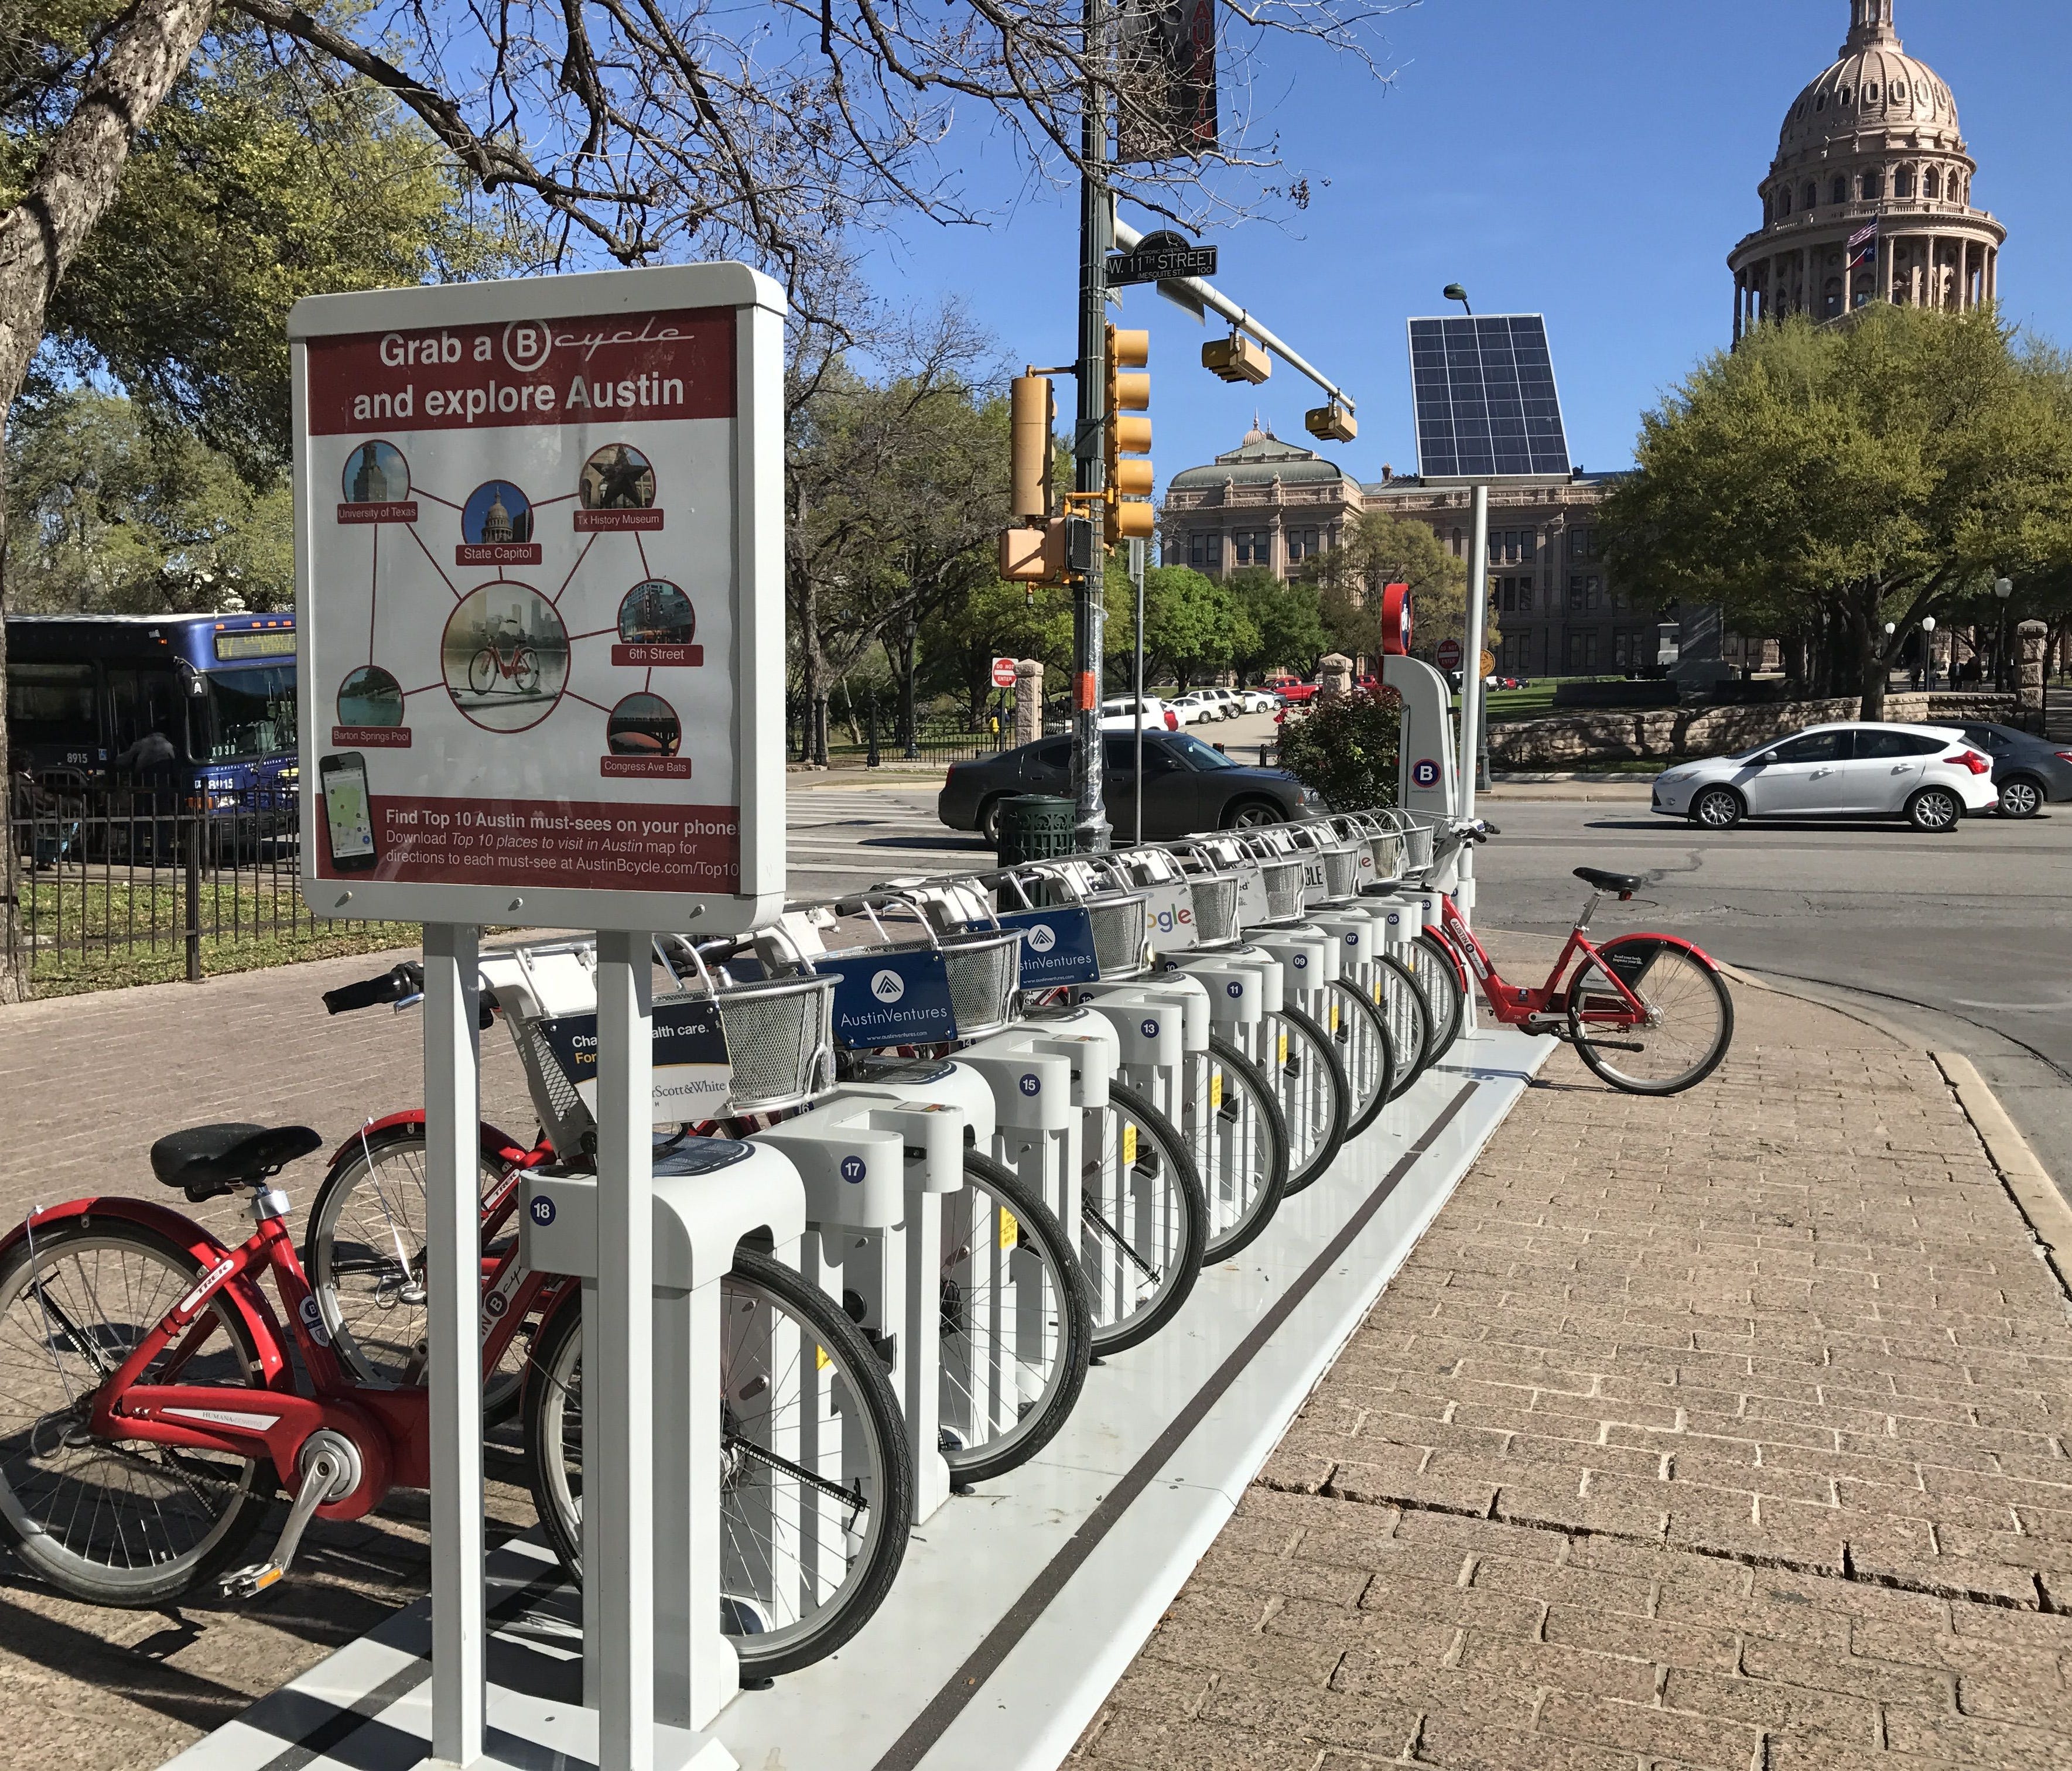 Transportation options in Austin, Texas, include fleets of rental bikes positioned around town.